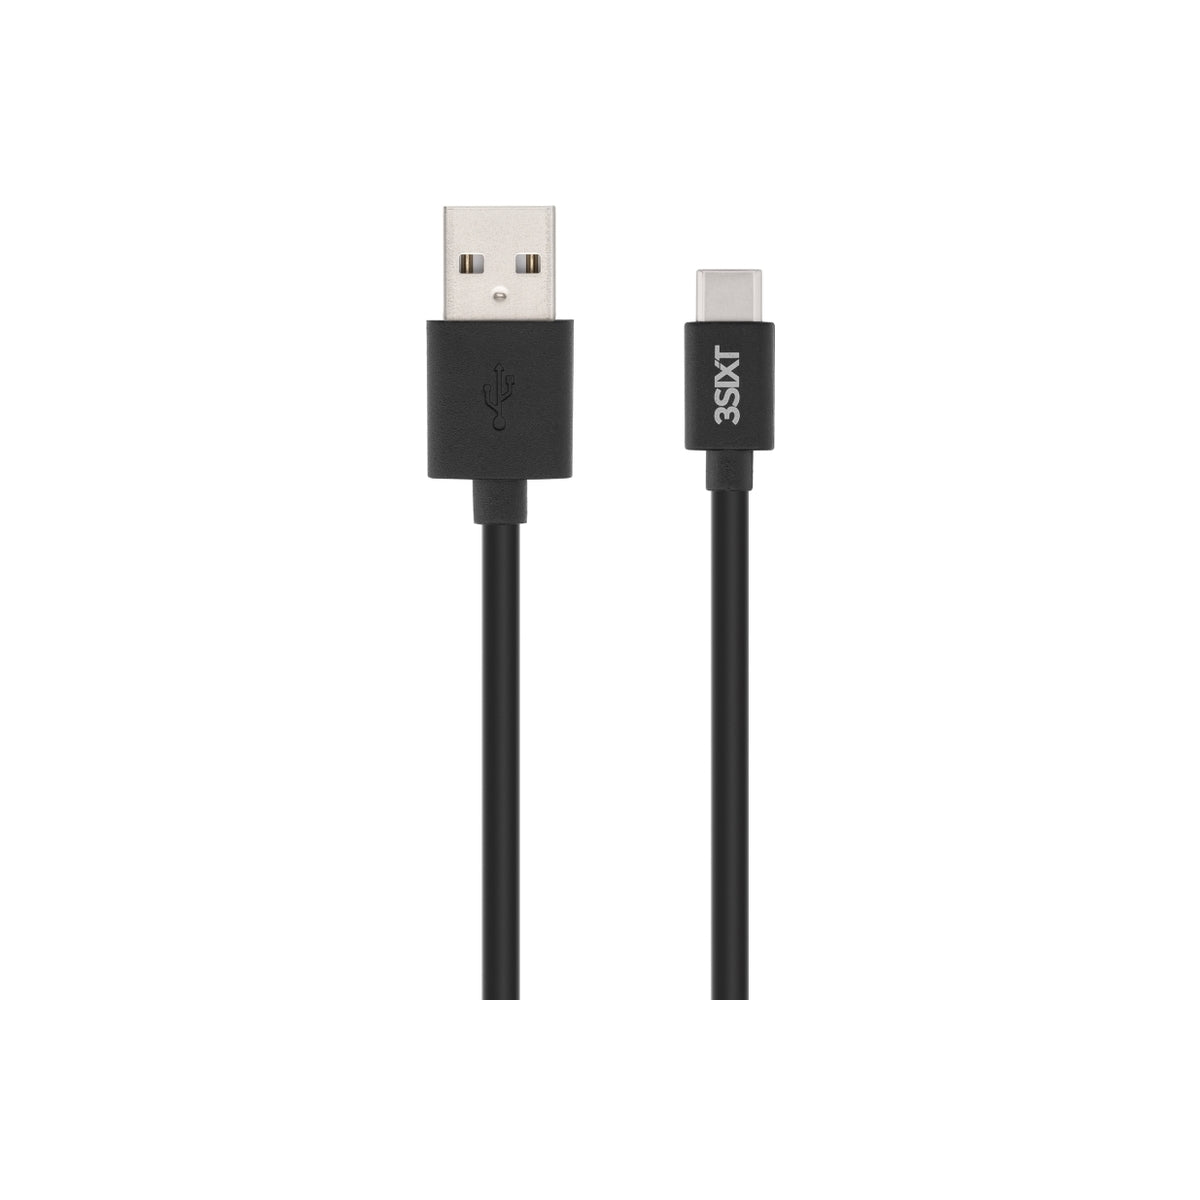 3sixT Charge & Sync Cable - USB-A to USB-C - 1m - Black.